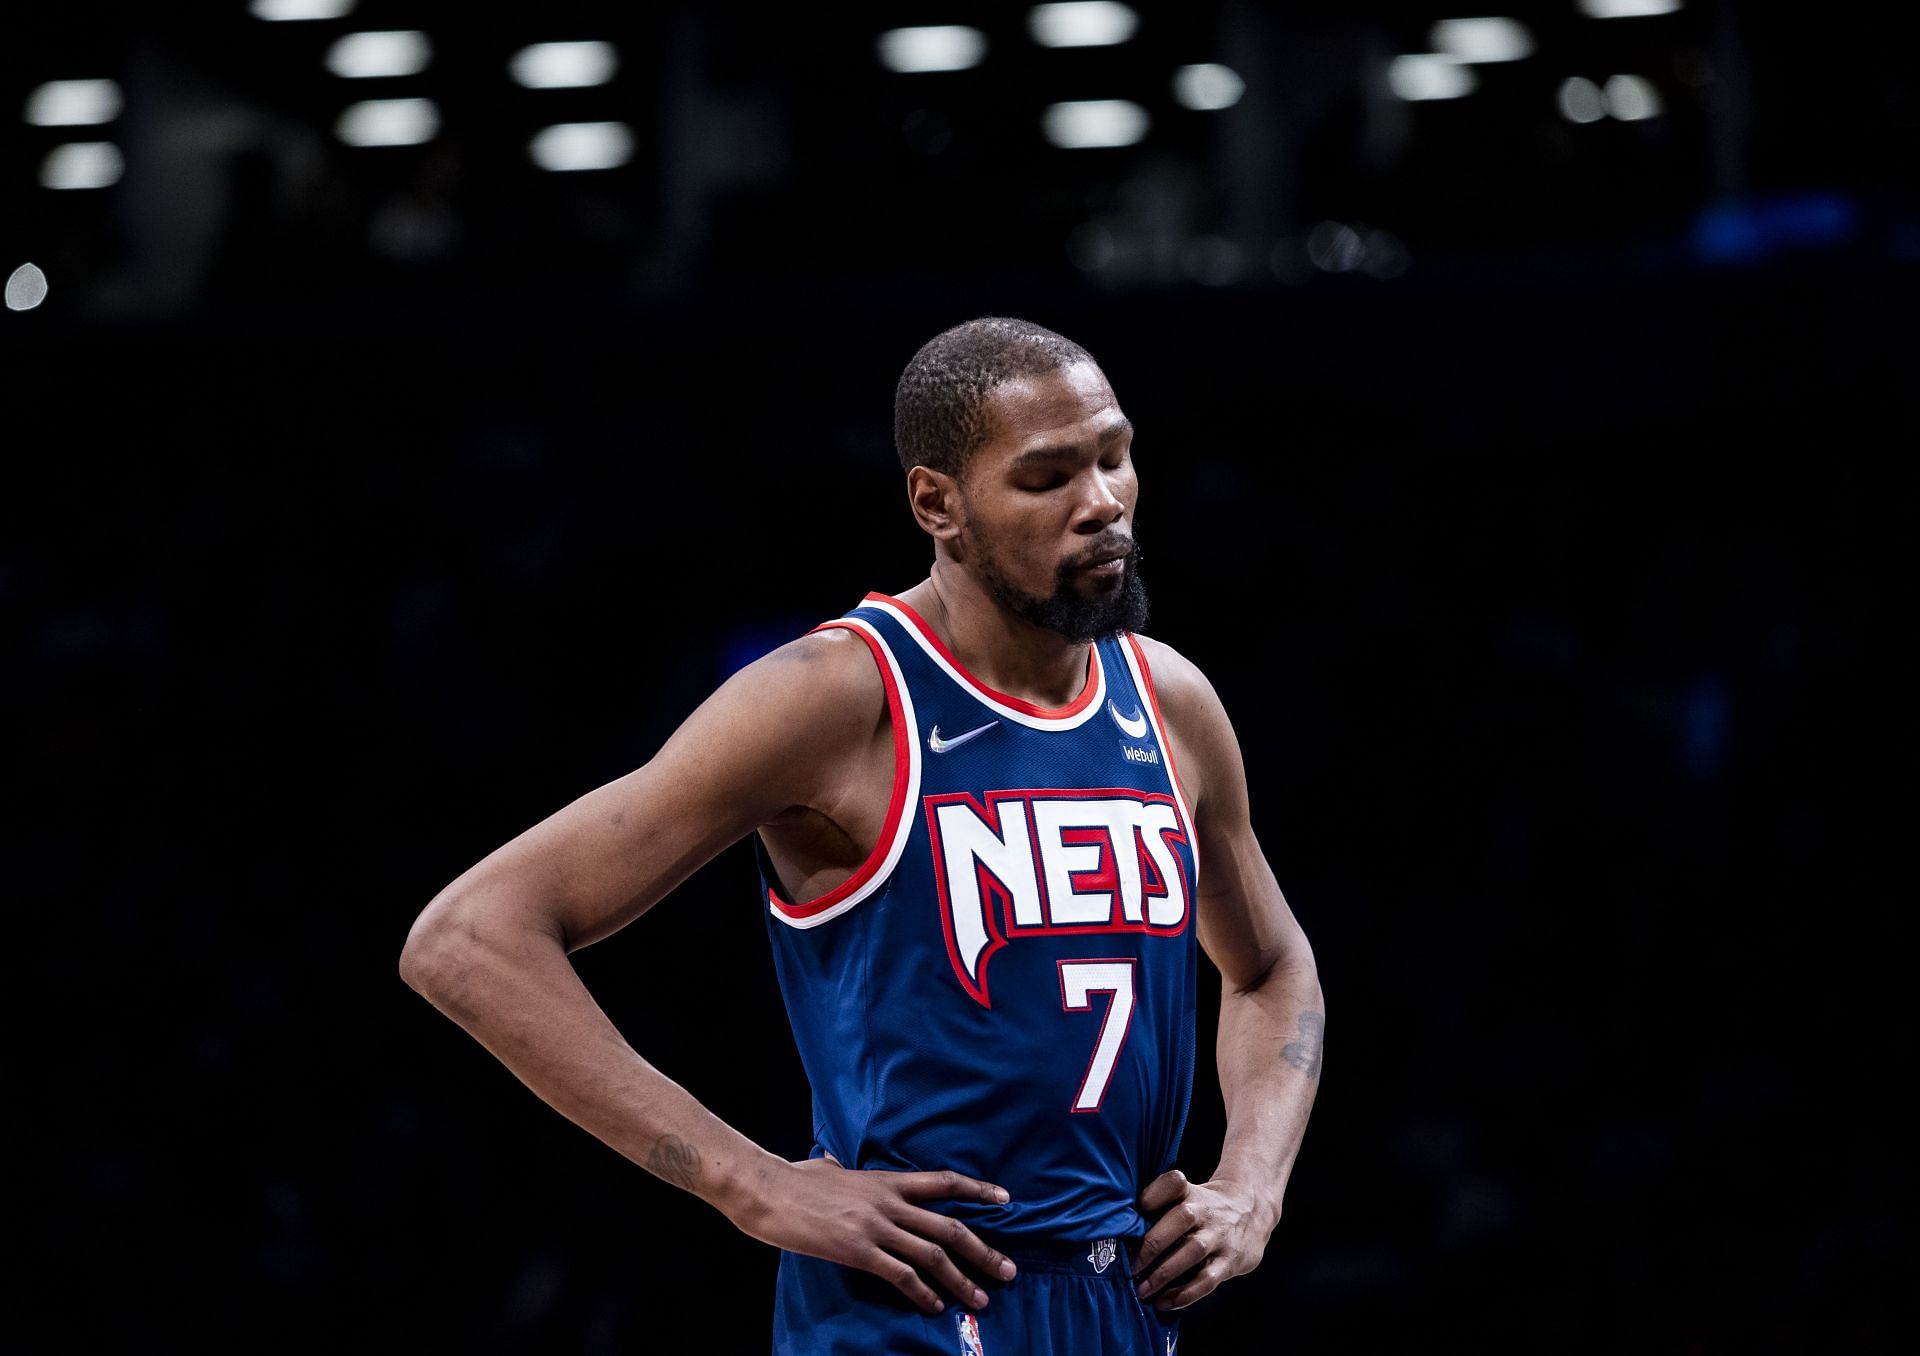 Kevin Durant of the Brooklyn Nets during a game.